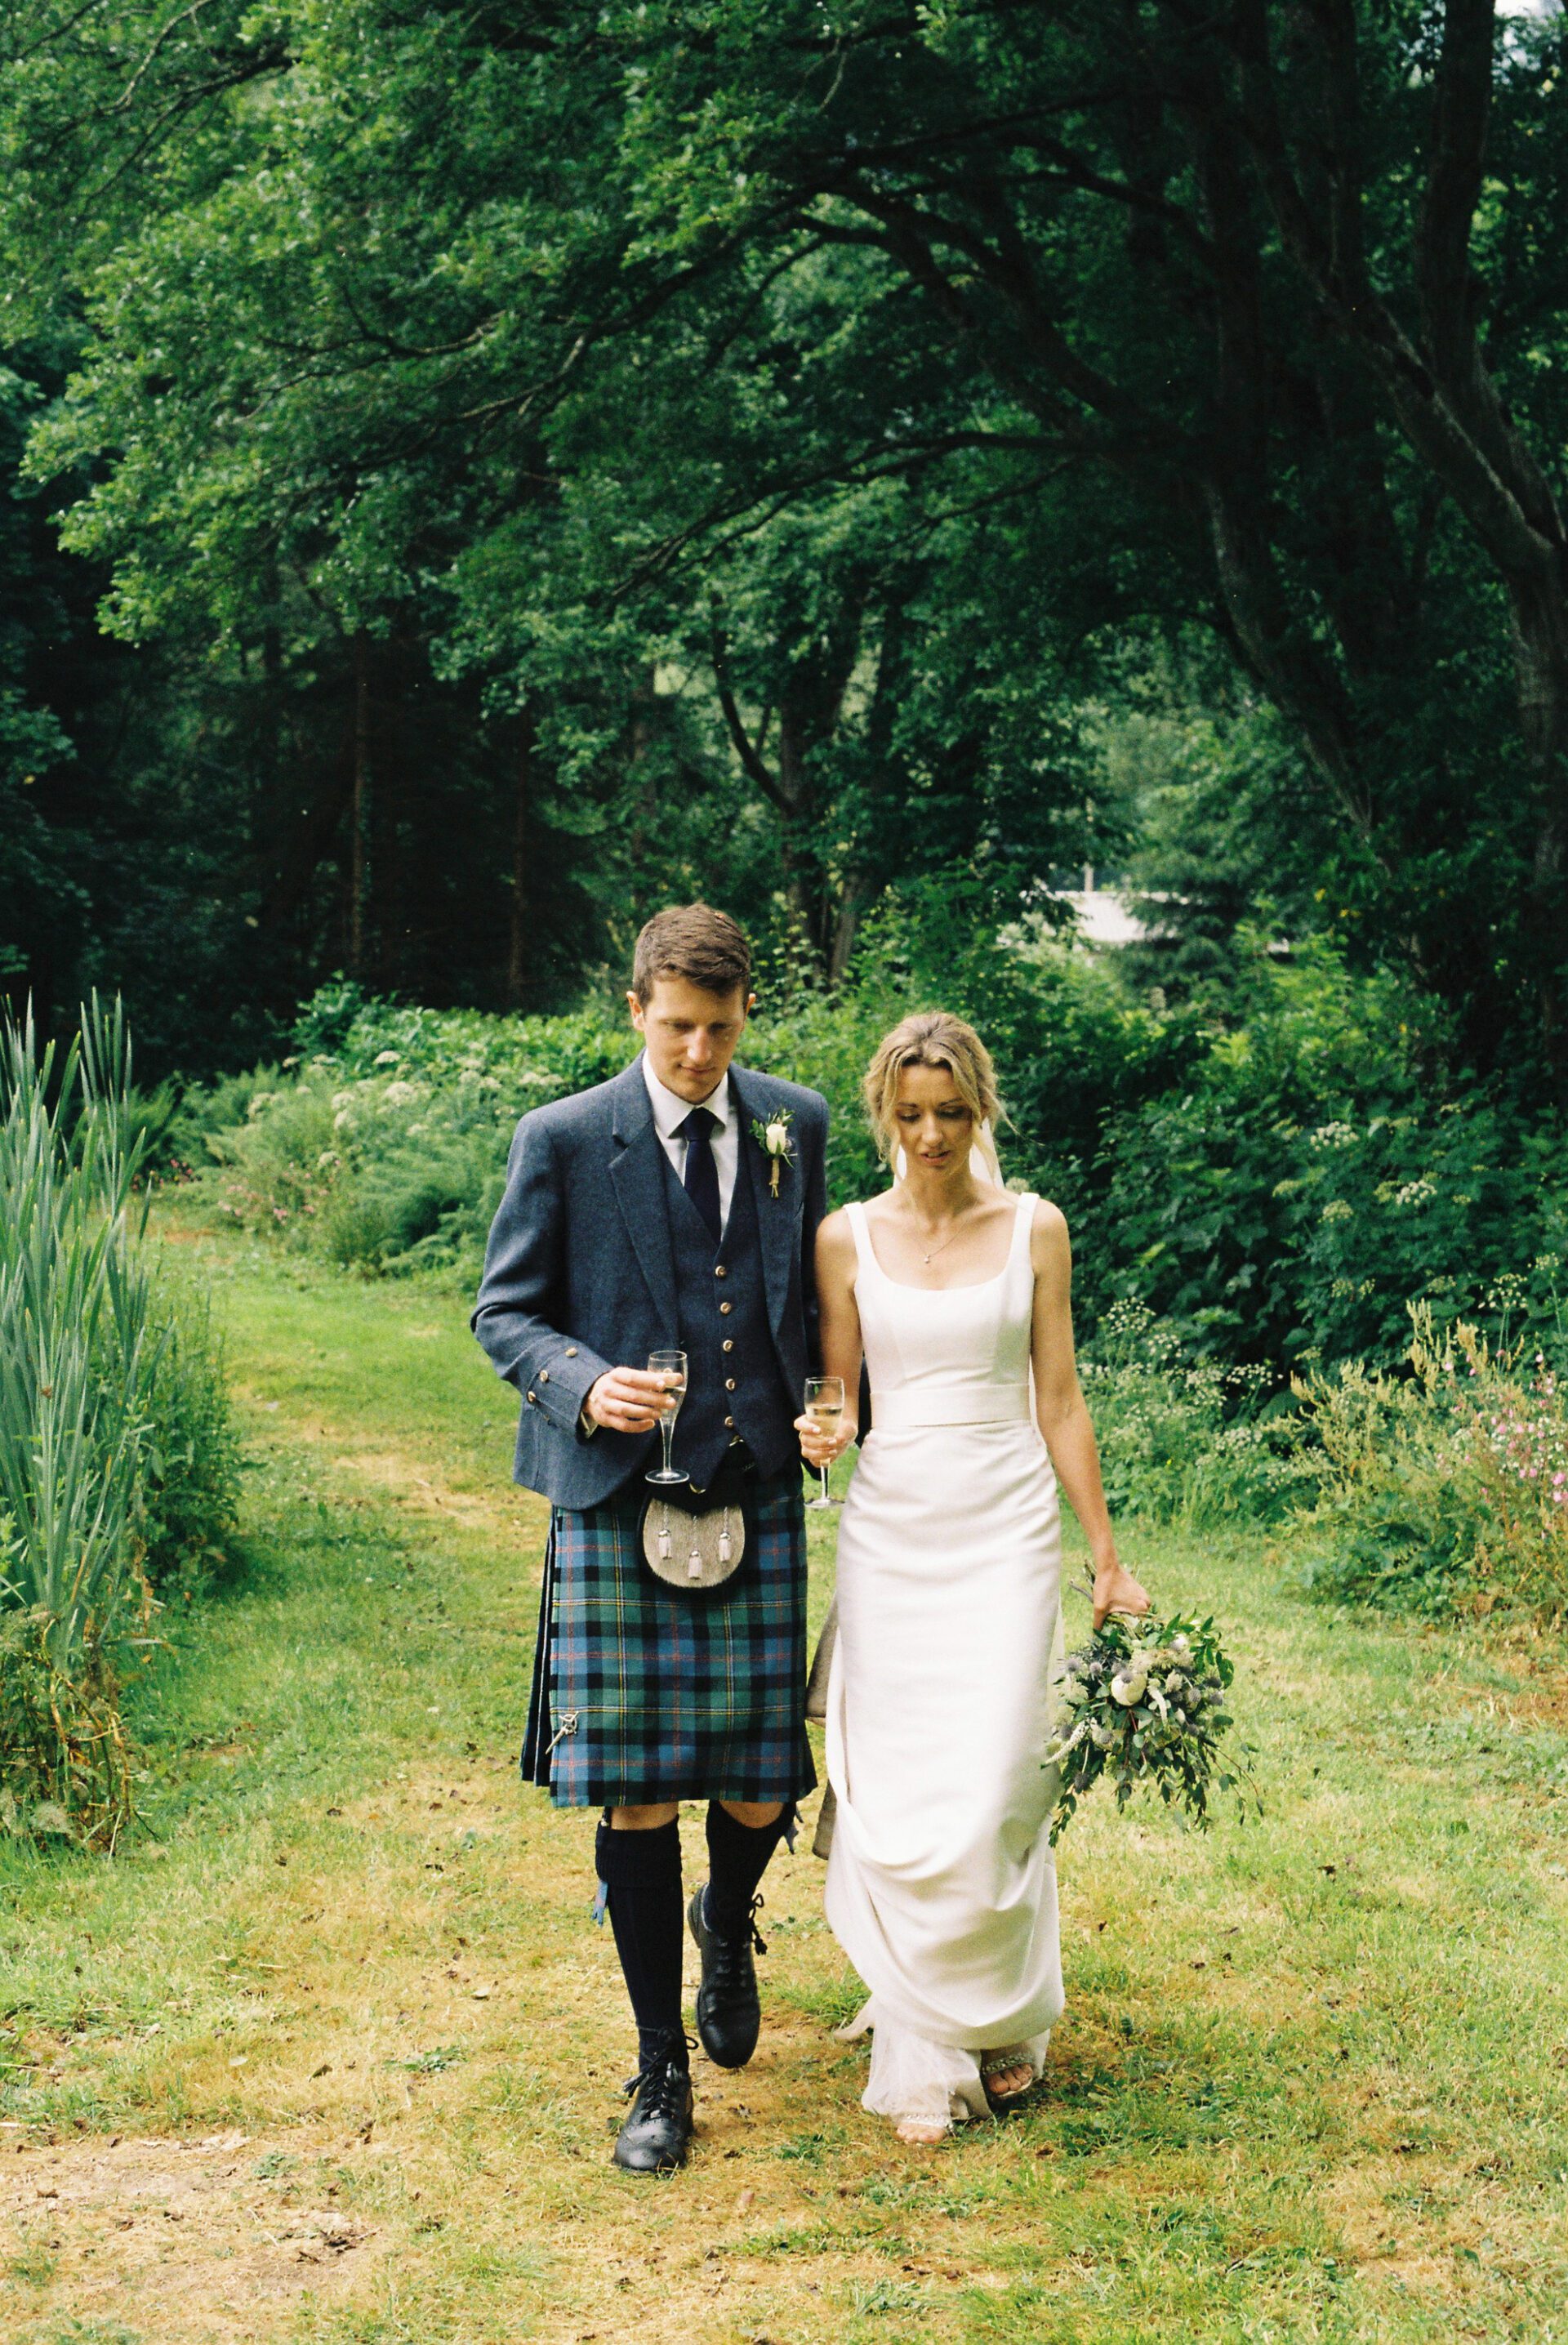 The bride and groom walk hand in hand, captured on 35mm film